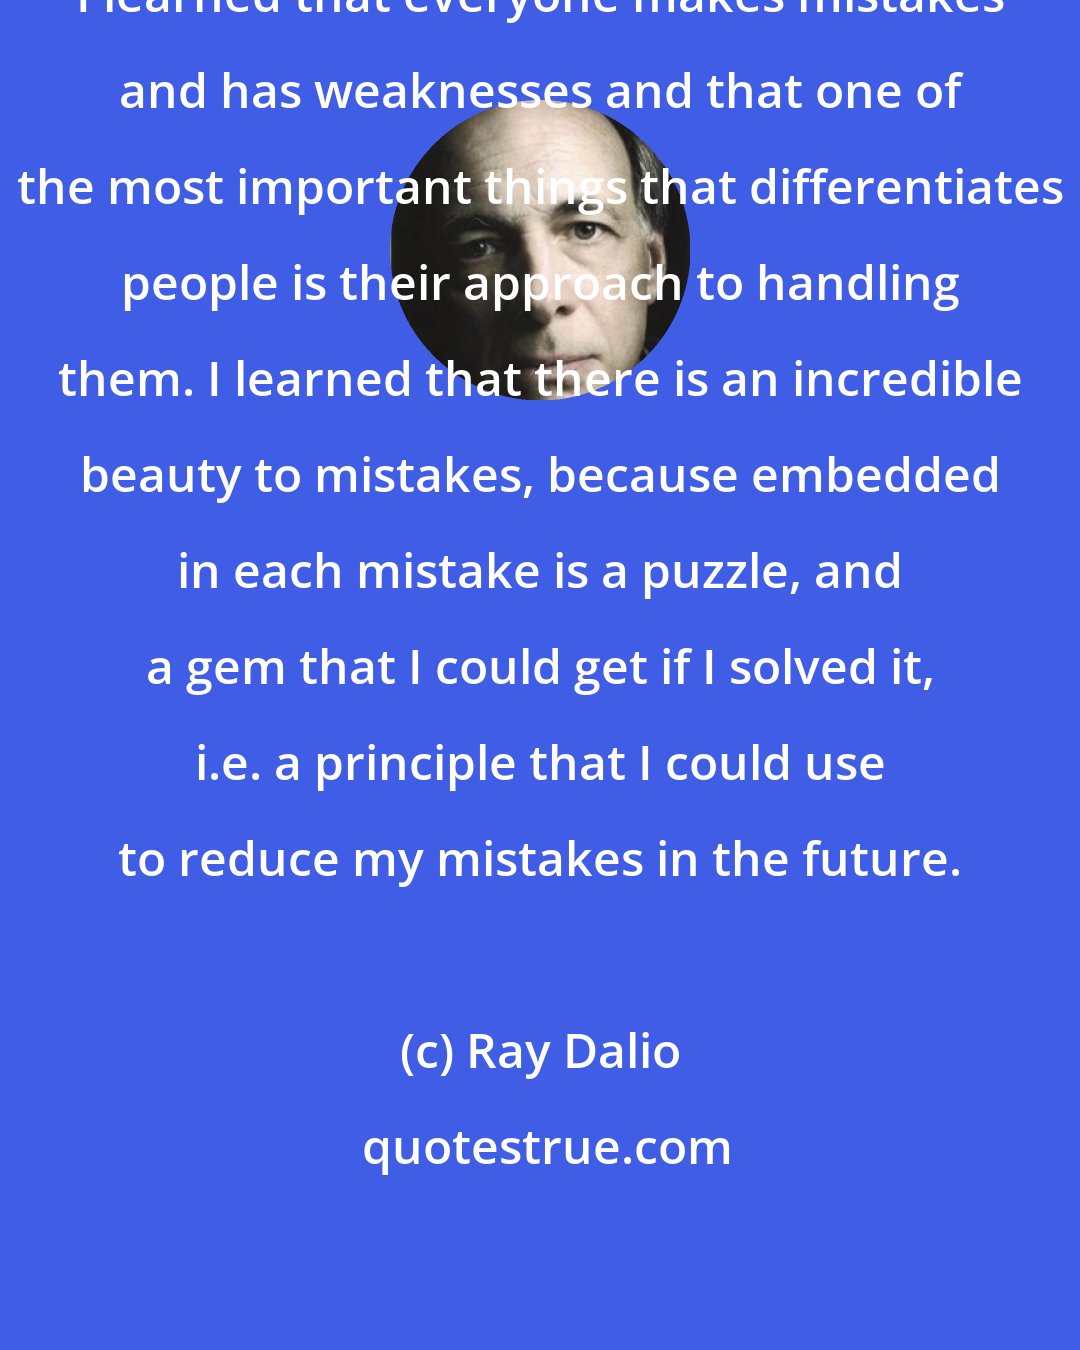 Ray Dalio: I learned that everyone makes mistakes and has weaknesses and that one of the most important things that differentiates people is their approach to handling them. I learned that there is an incredible beauty to mistakes, because embedded in each mistake is a puzzle, and a gem that I could get if I solved it, i.e. a principle that I could use to reduce my mistakes in the future.